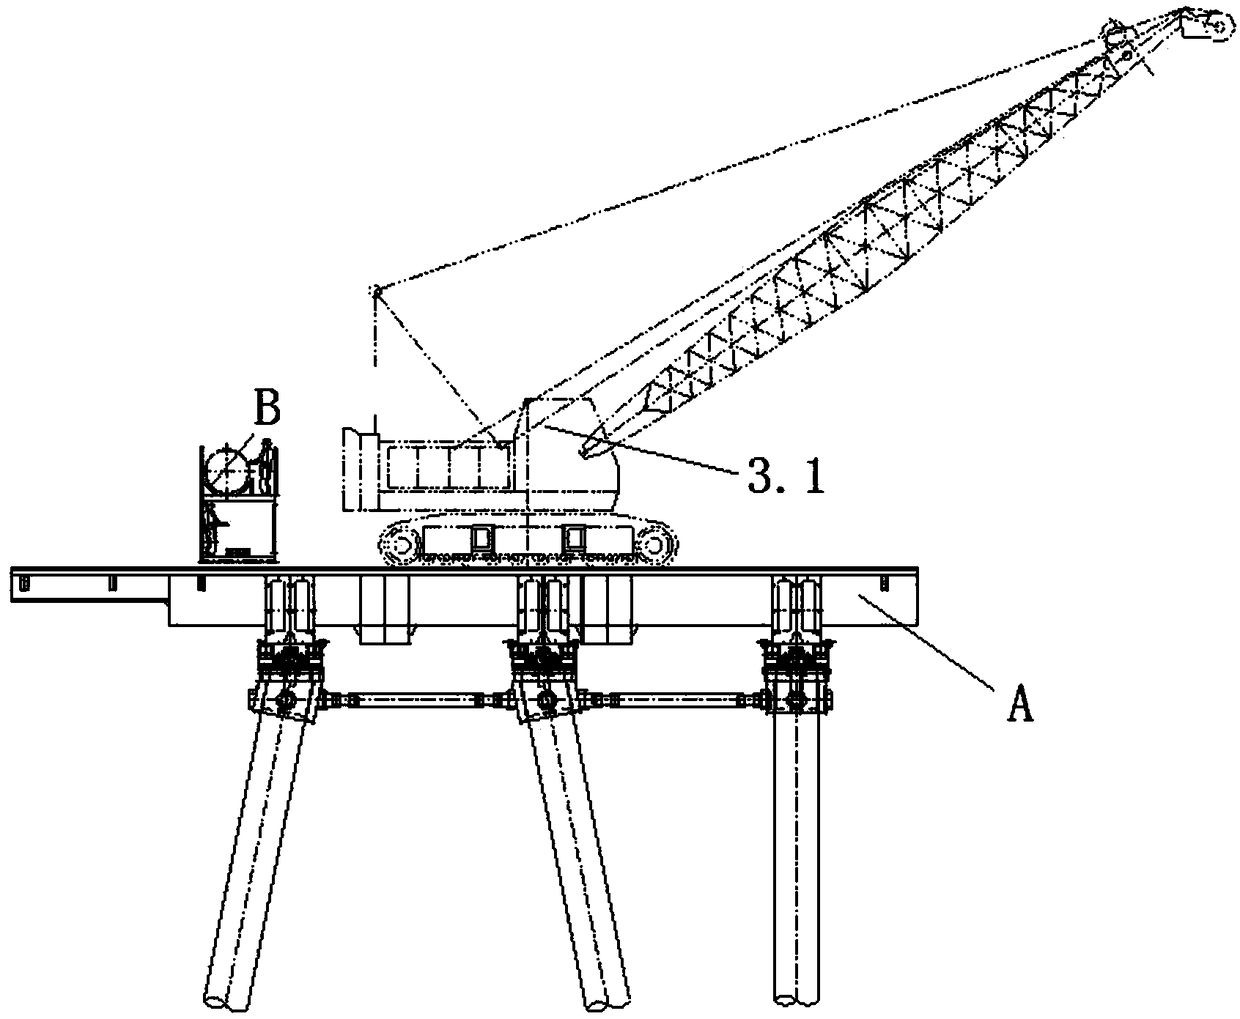 Wharf integrated construction system and method based on pile top pushing platform